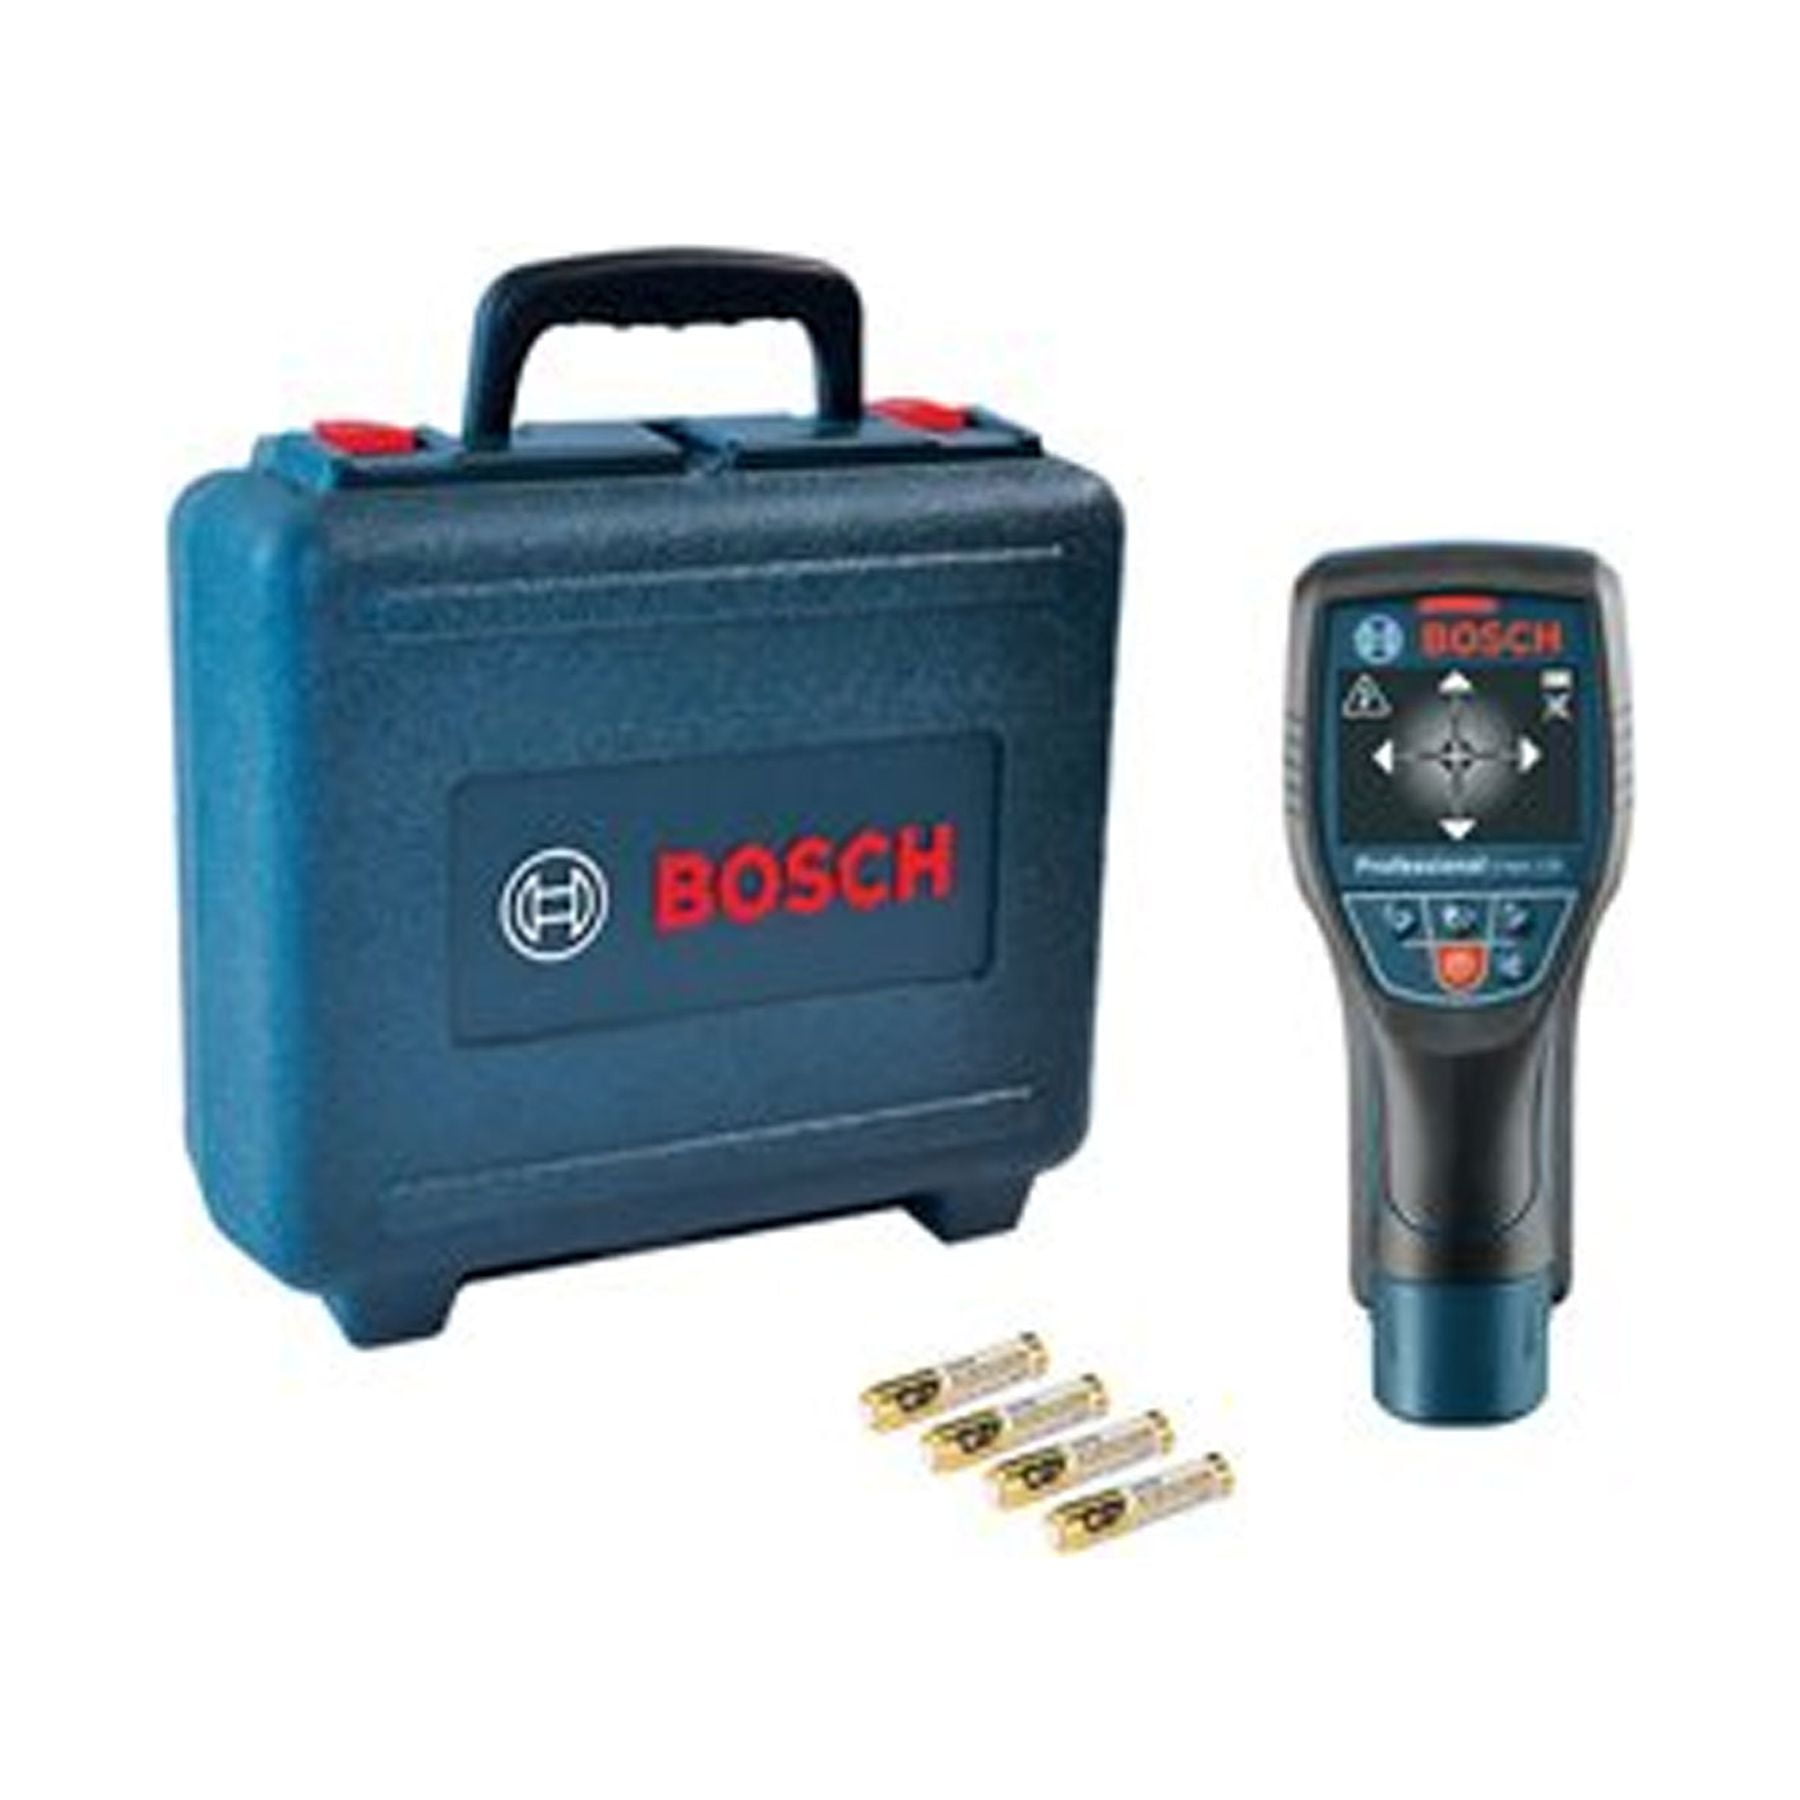 Bosch Metal Detector D-tect 120 Cable Detector Detects  Metal/Cable/Wood/Water Pipe/Wire High-precision Wall Gold Detector